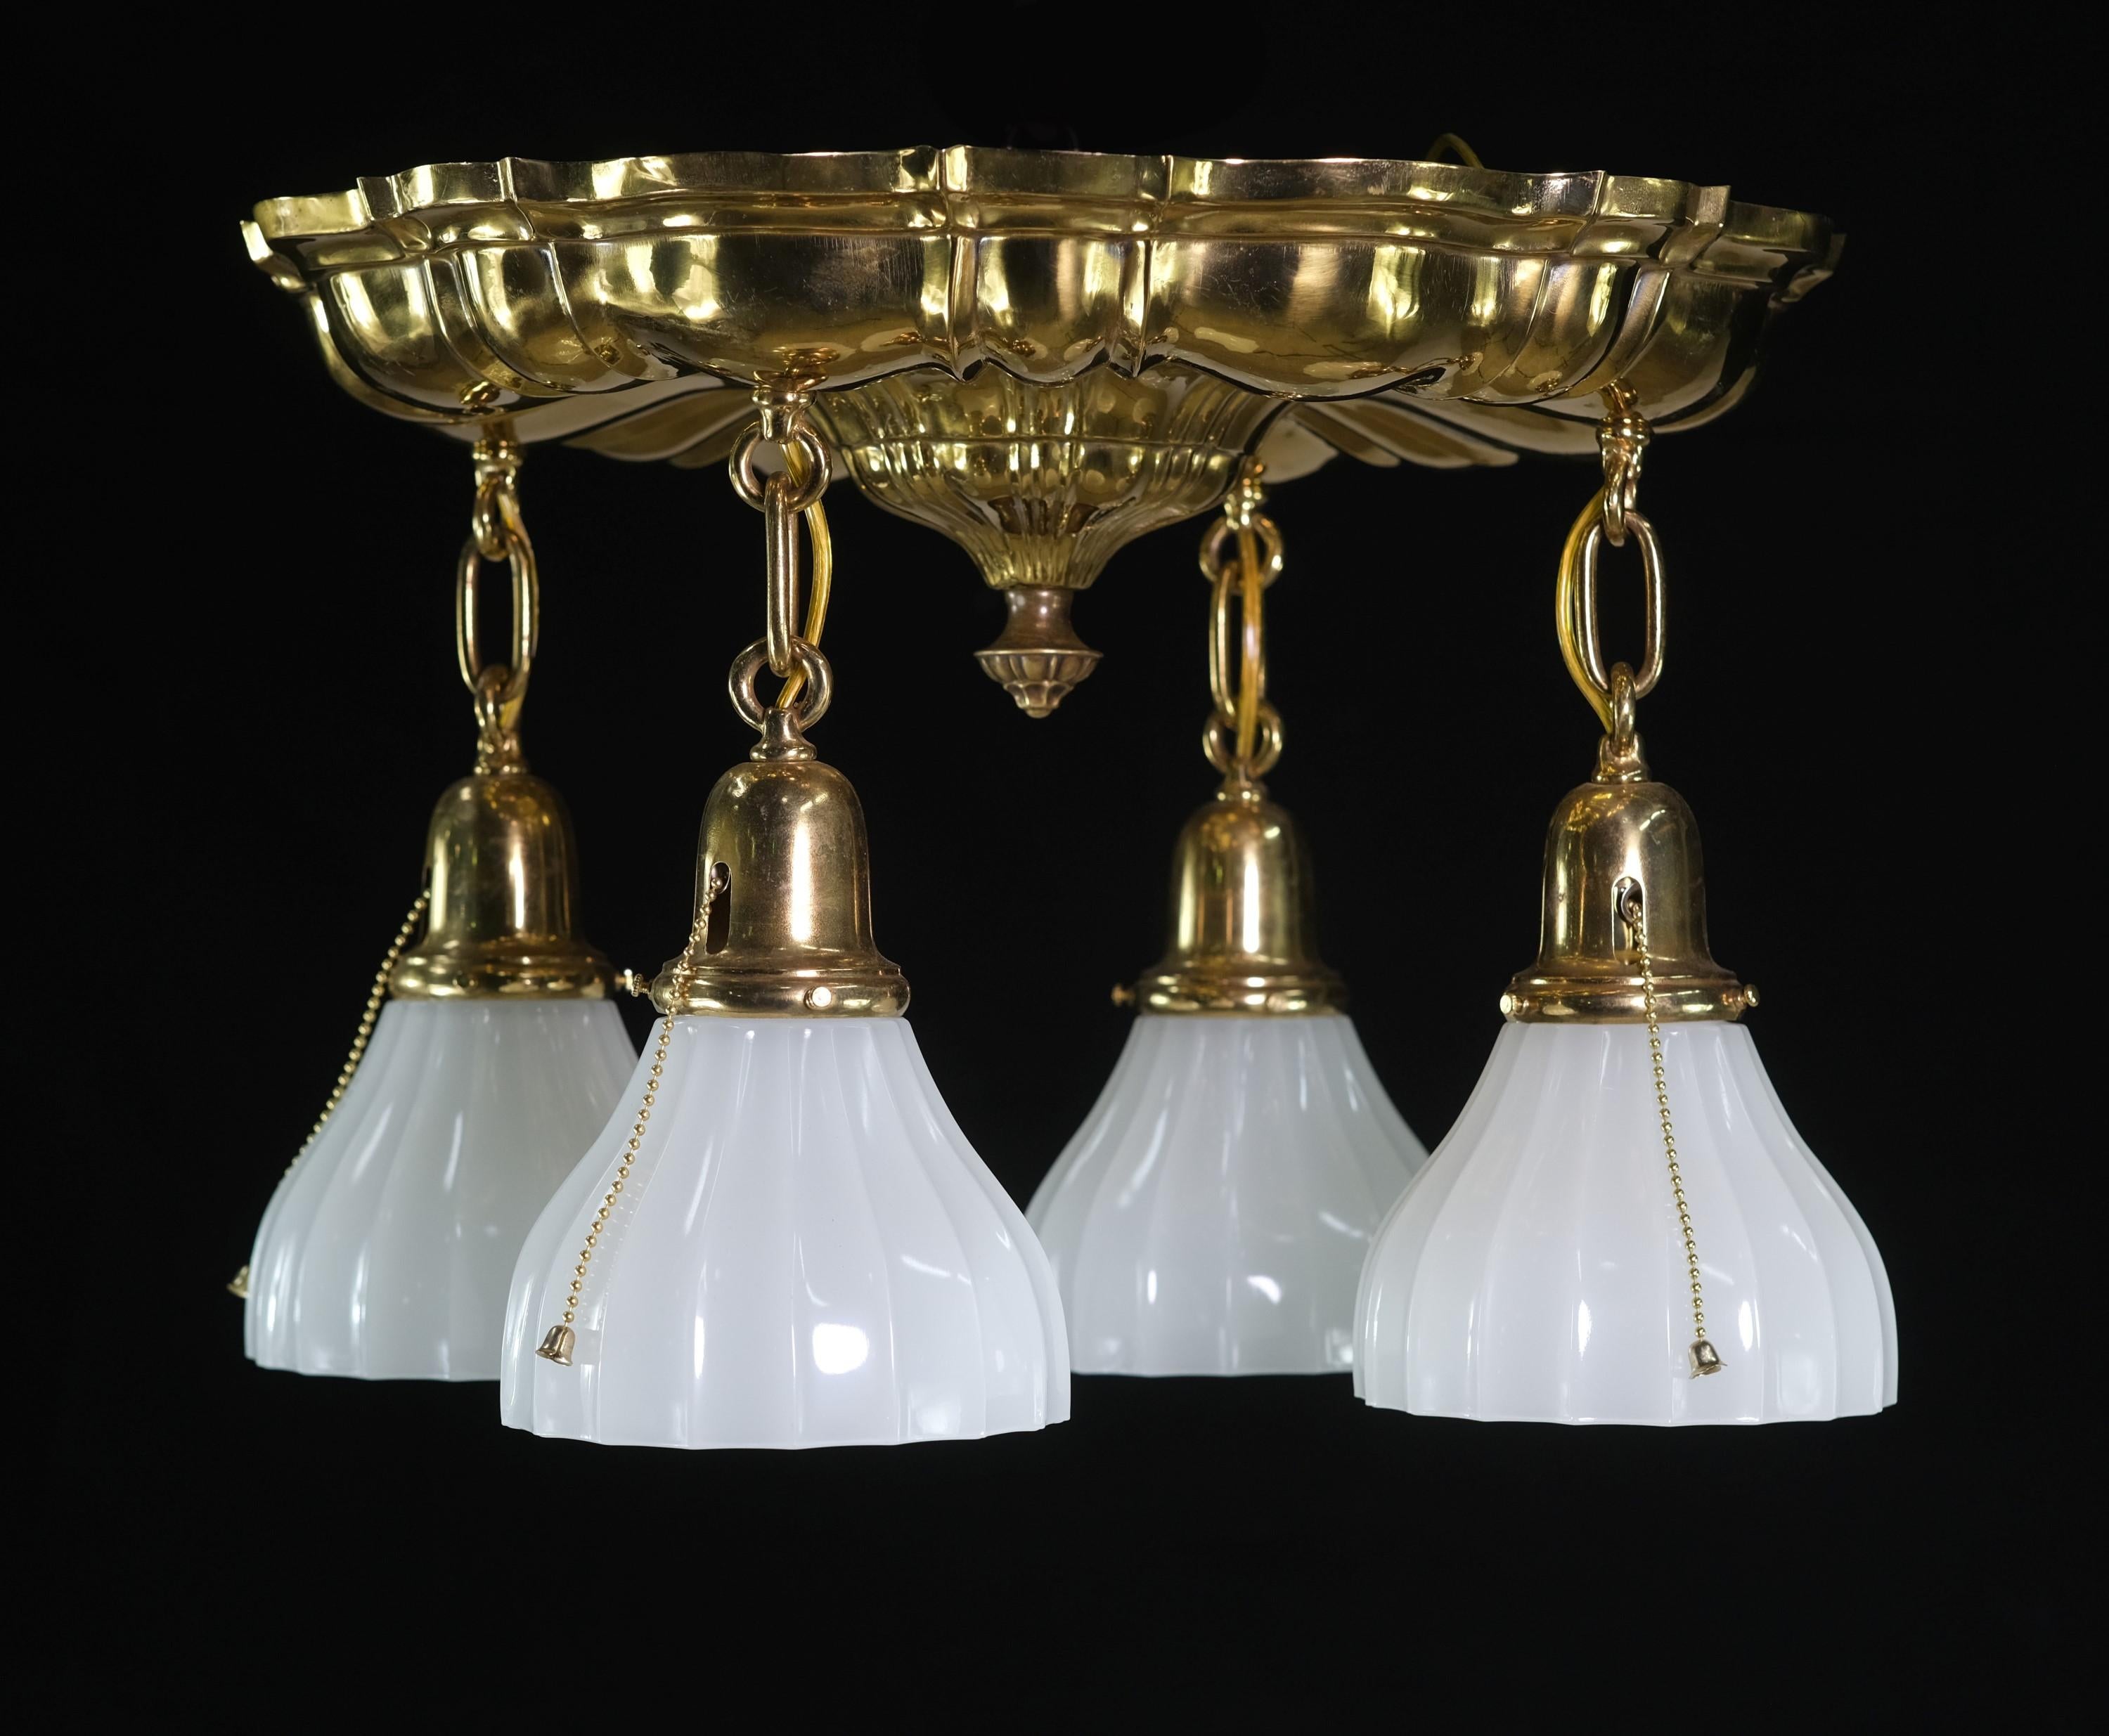 1910s polished brass ceiling mount pan light fixture pendant featuring four hanging down lights. Original milk glass shades. Minor chipping along the edges of some shades. Attributed to Sheffield Lighting. This can be seen at our 400 Gilligan St